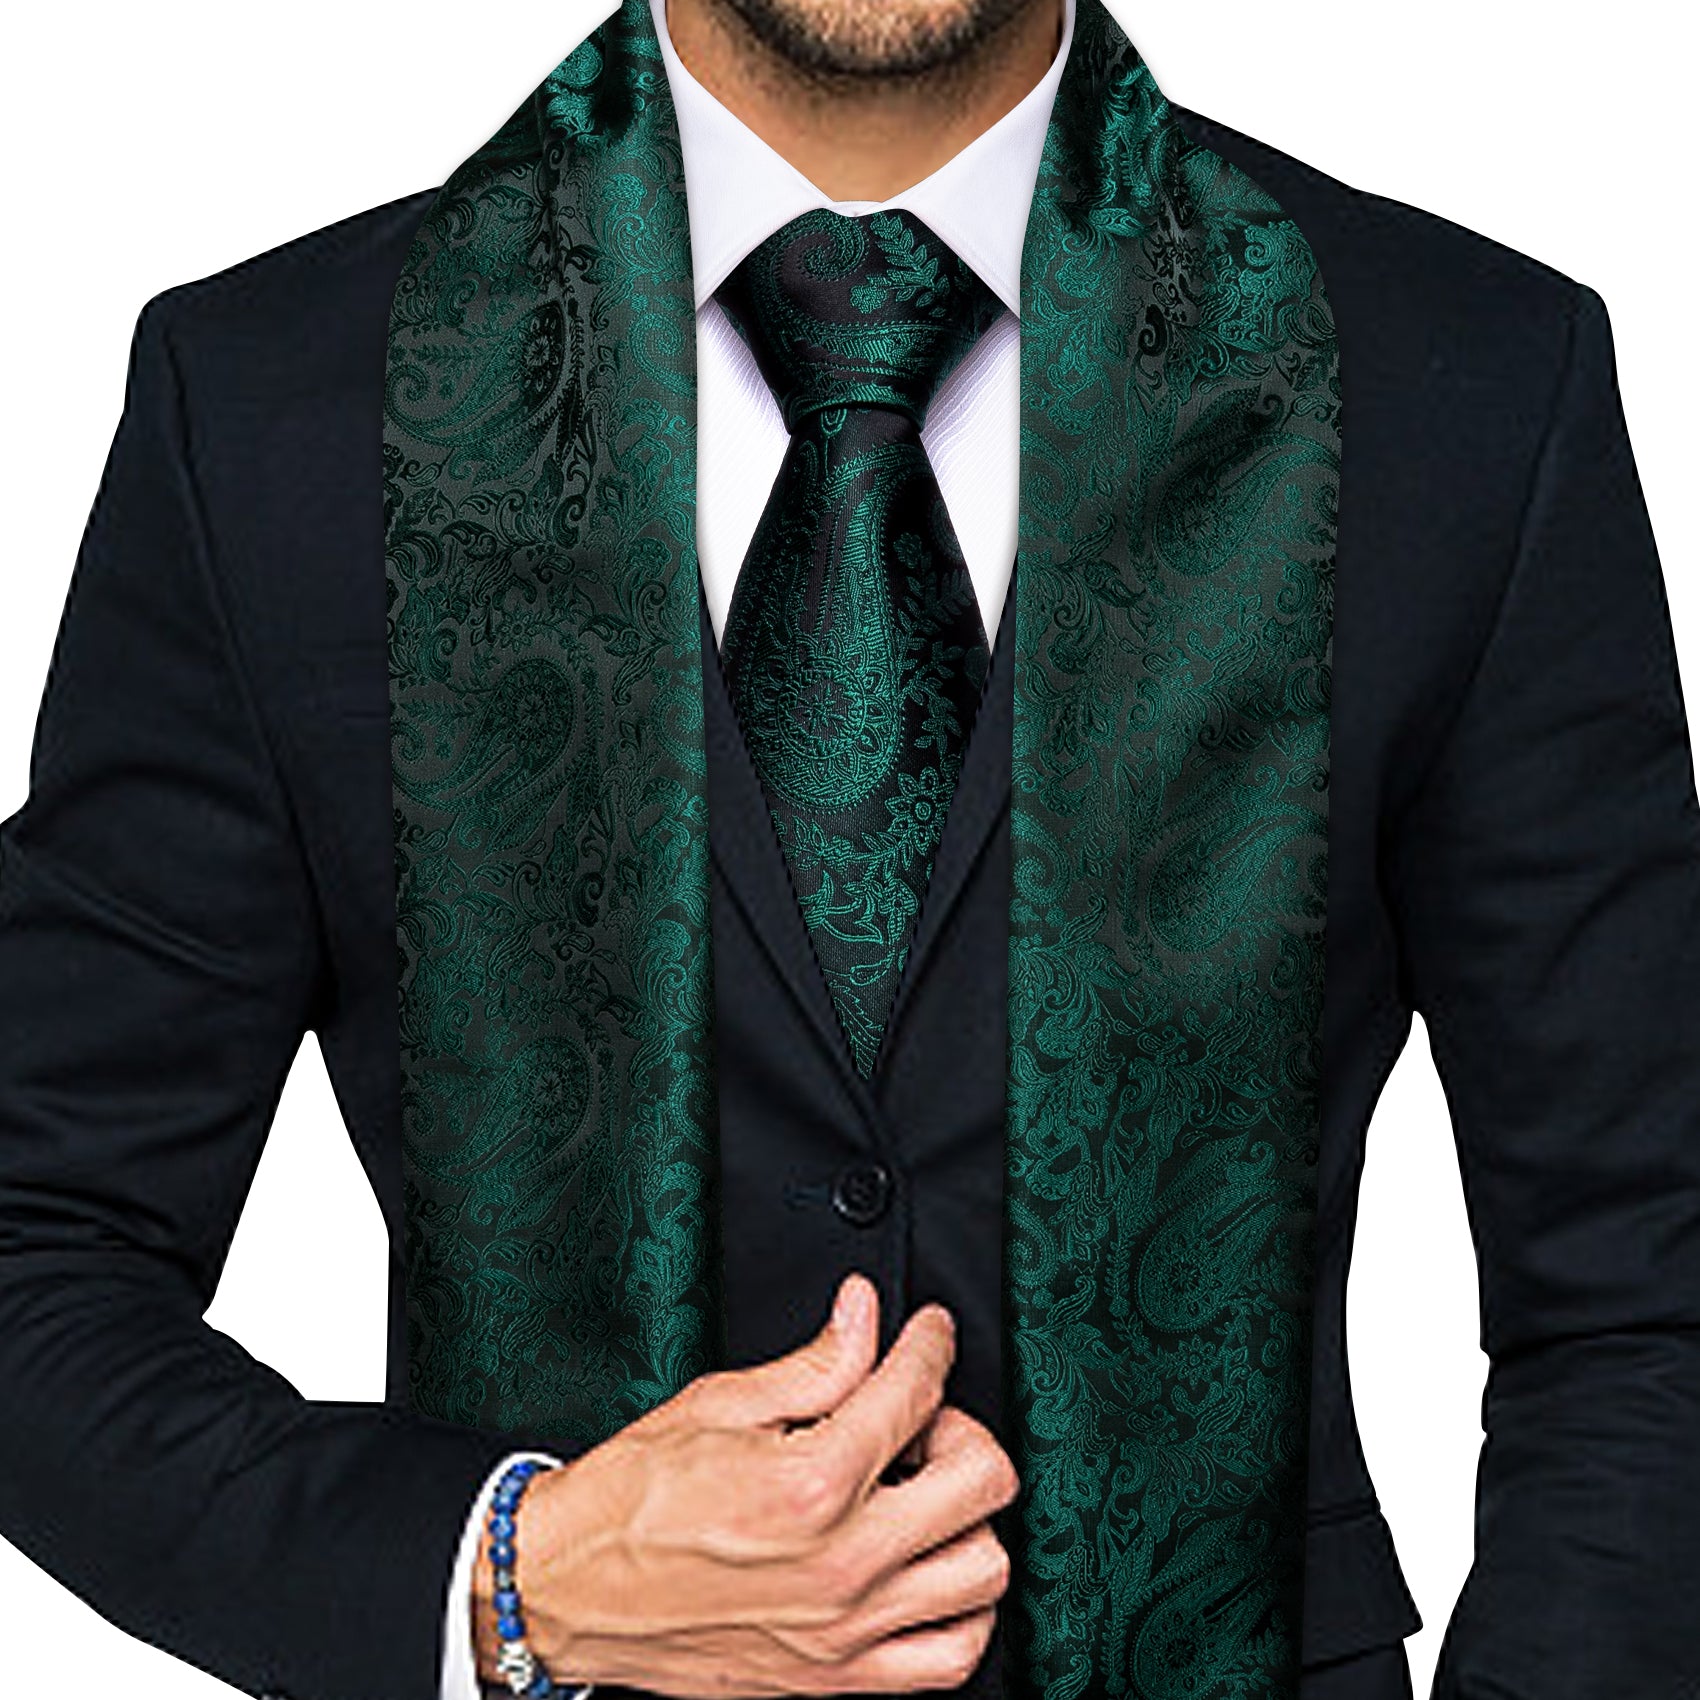 Luxury Green Paisley Scarf with Tie Set